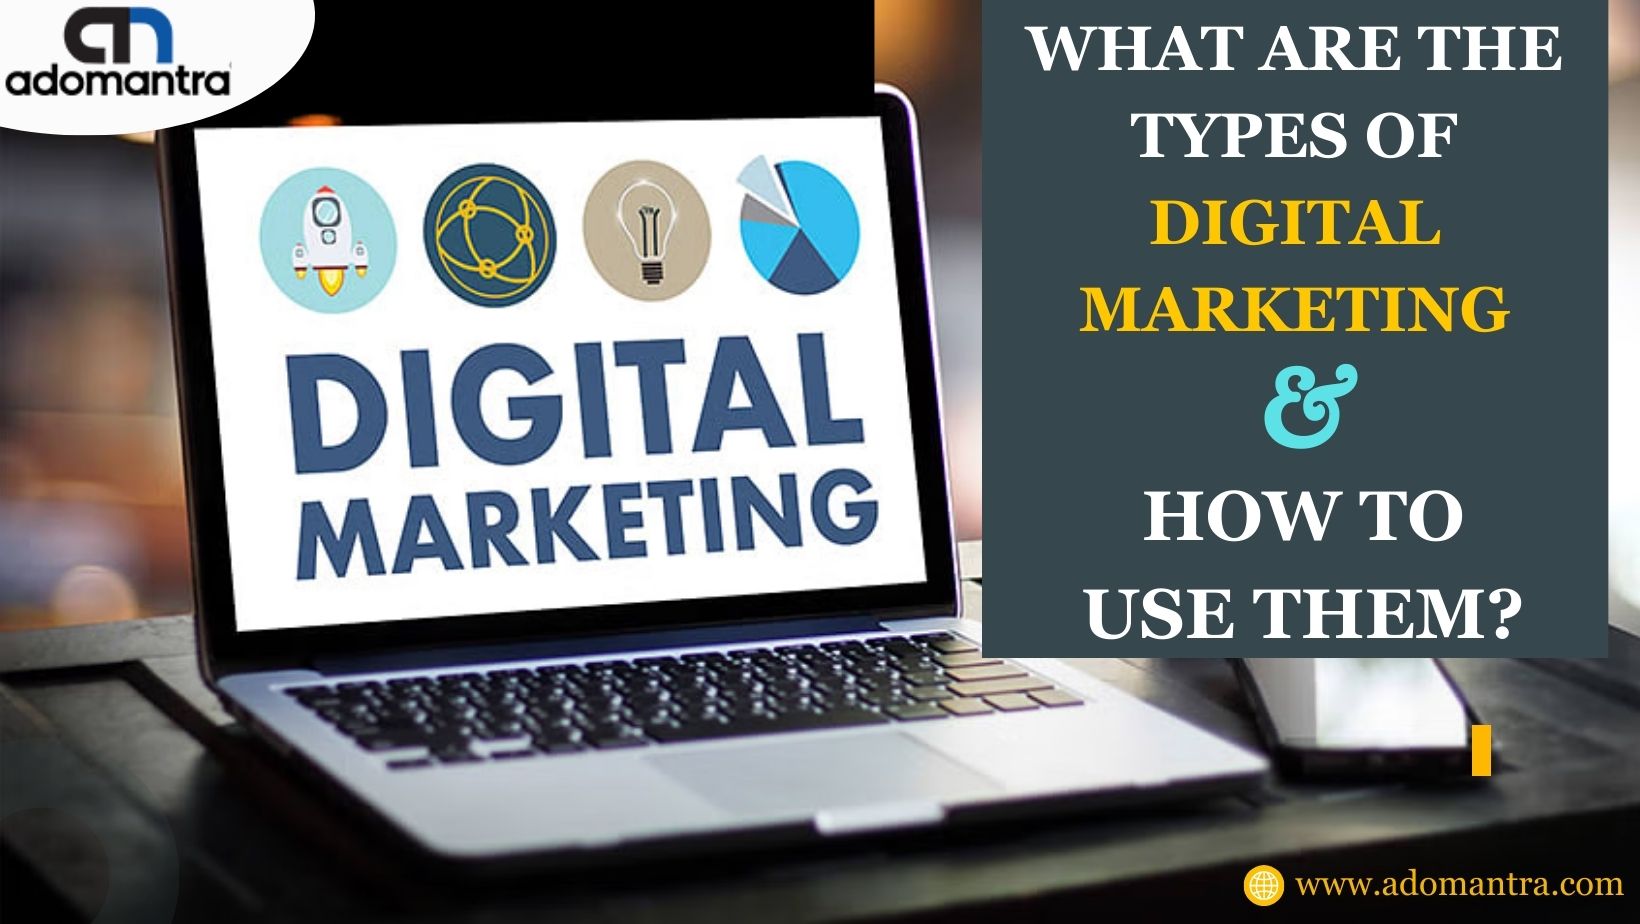 What Are The Types of Digital Marketing & How To Use Them?